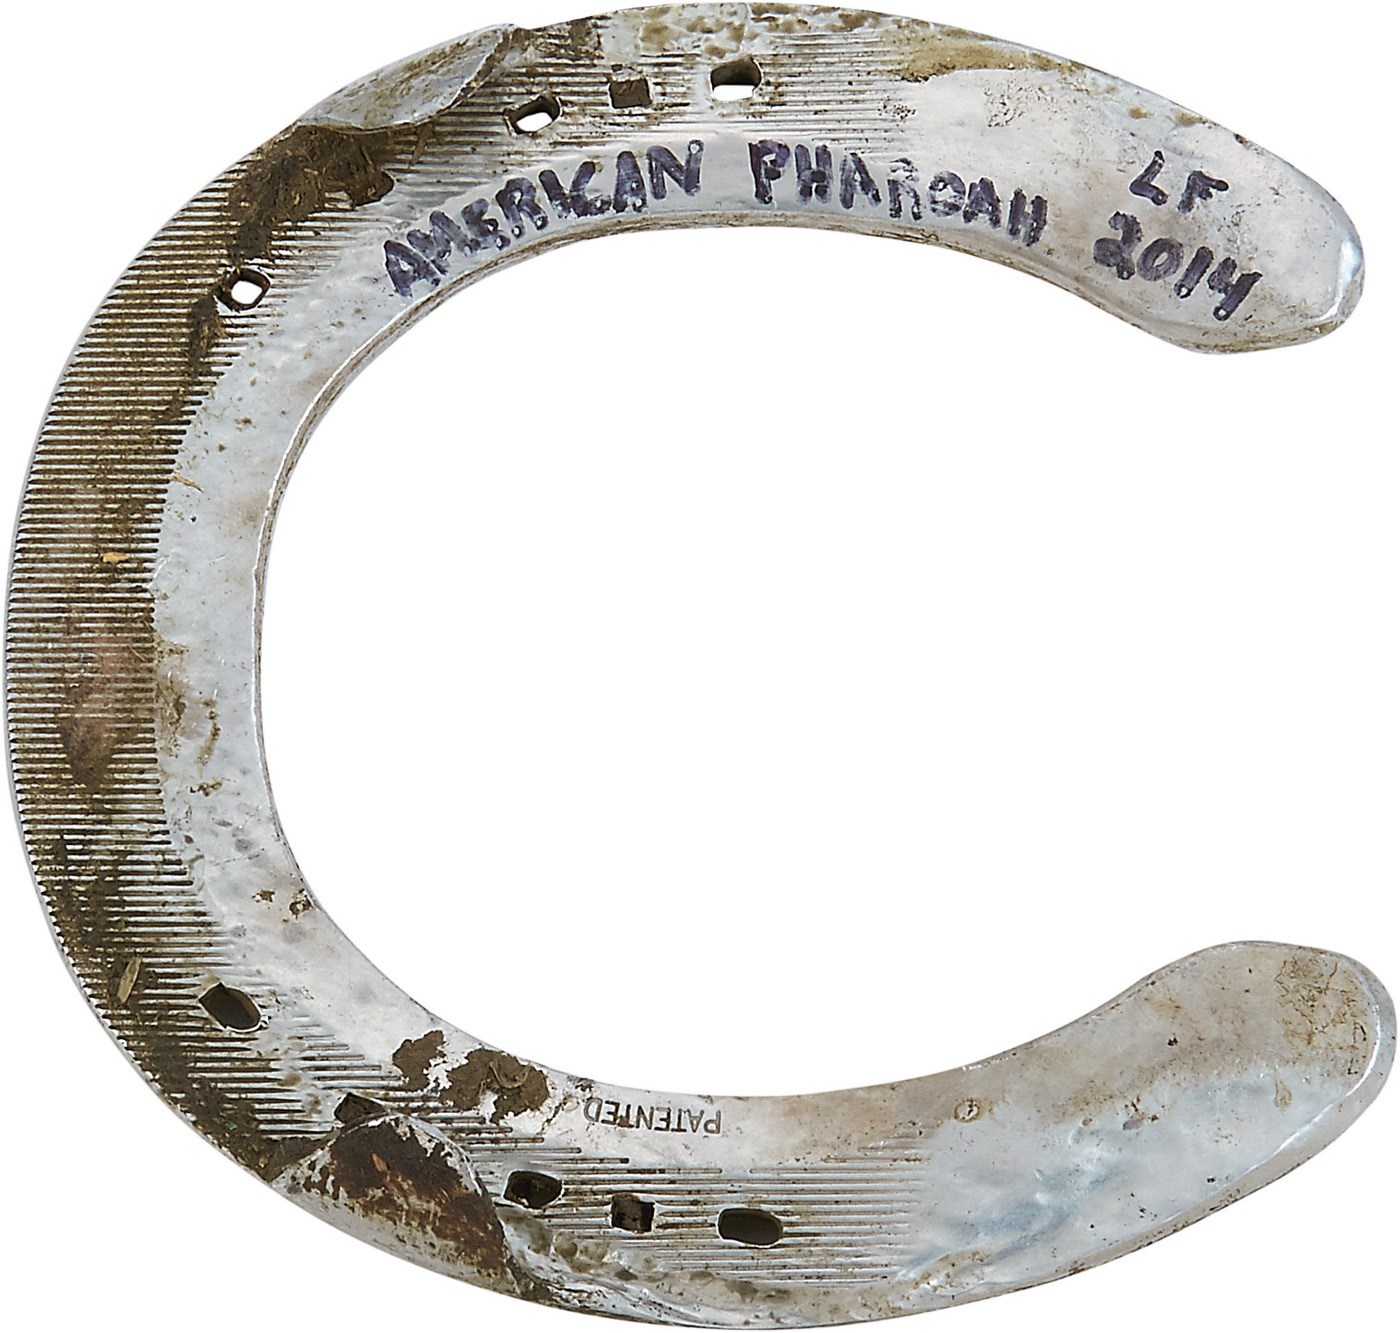 - 2014 American Pharoah Horse Shoe - Sourced from Taylor Made Farms Groomsman